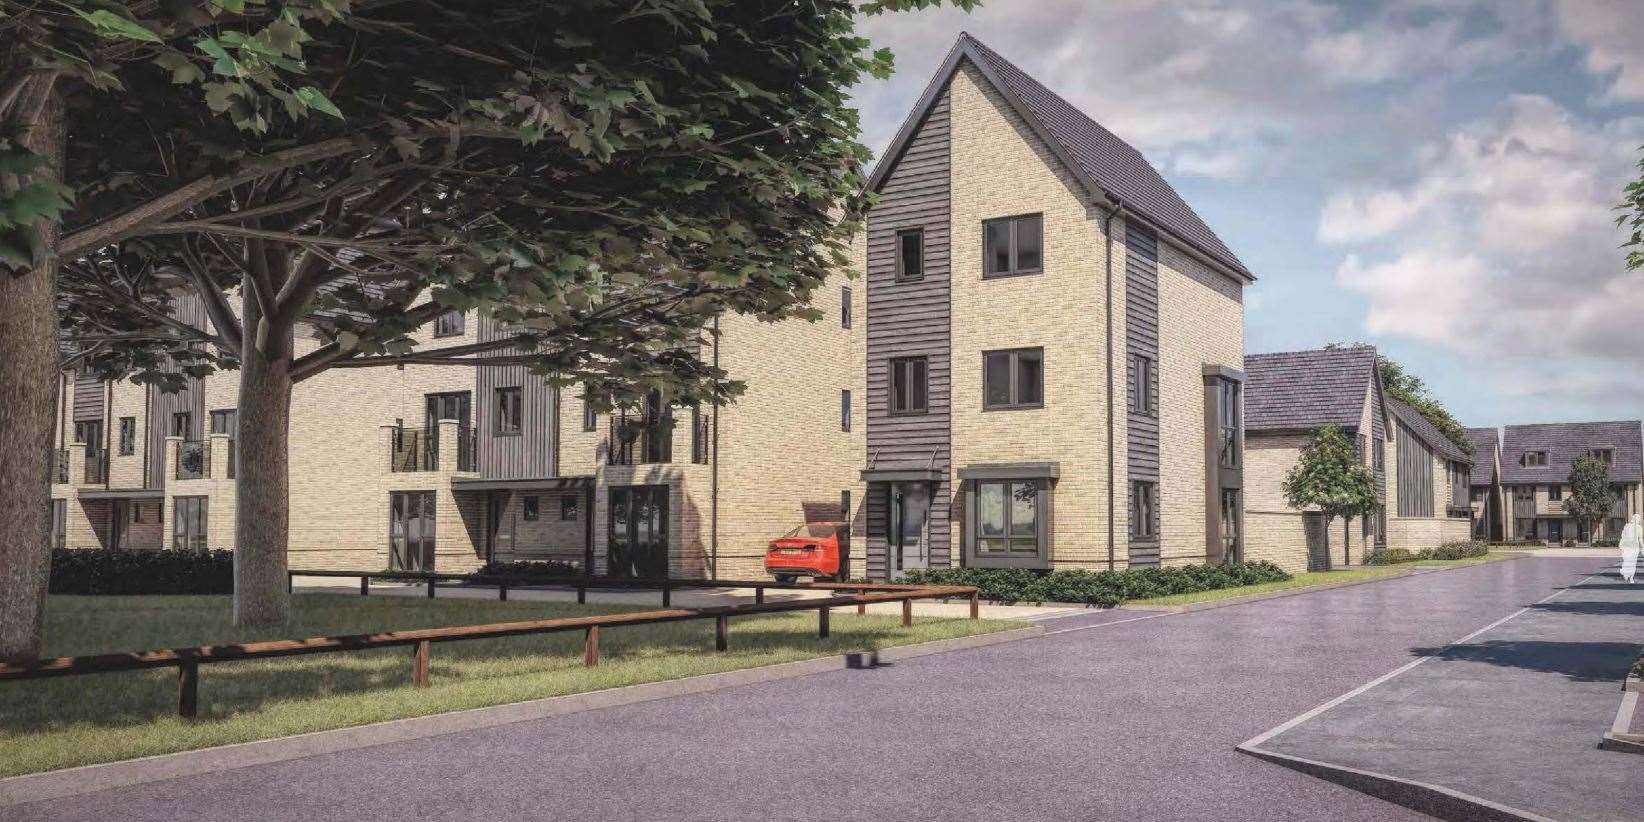 One of the home designs for Burgoyne Barracks. Credit: Taylor Wimpey Design Statement (10910779)